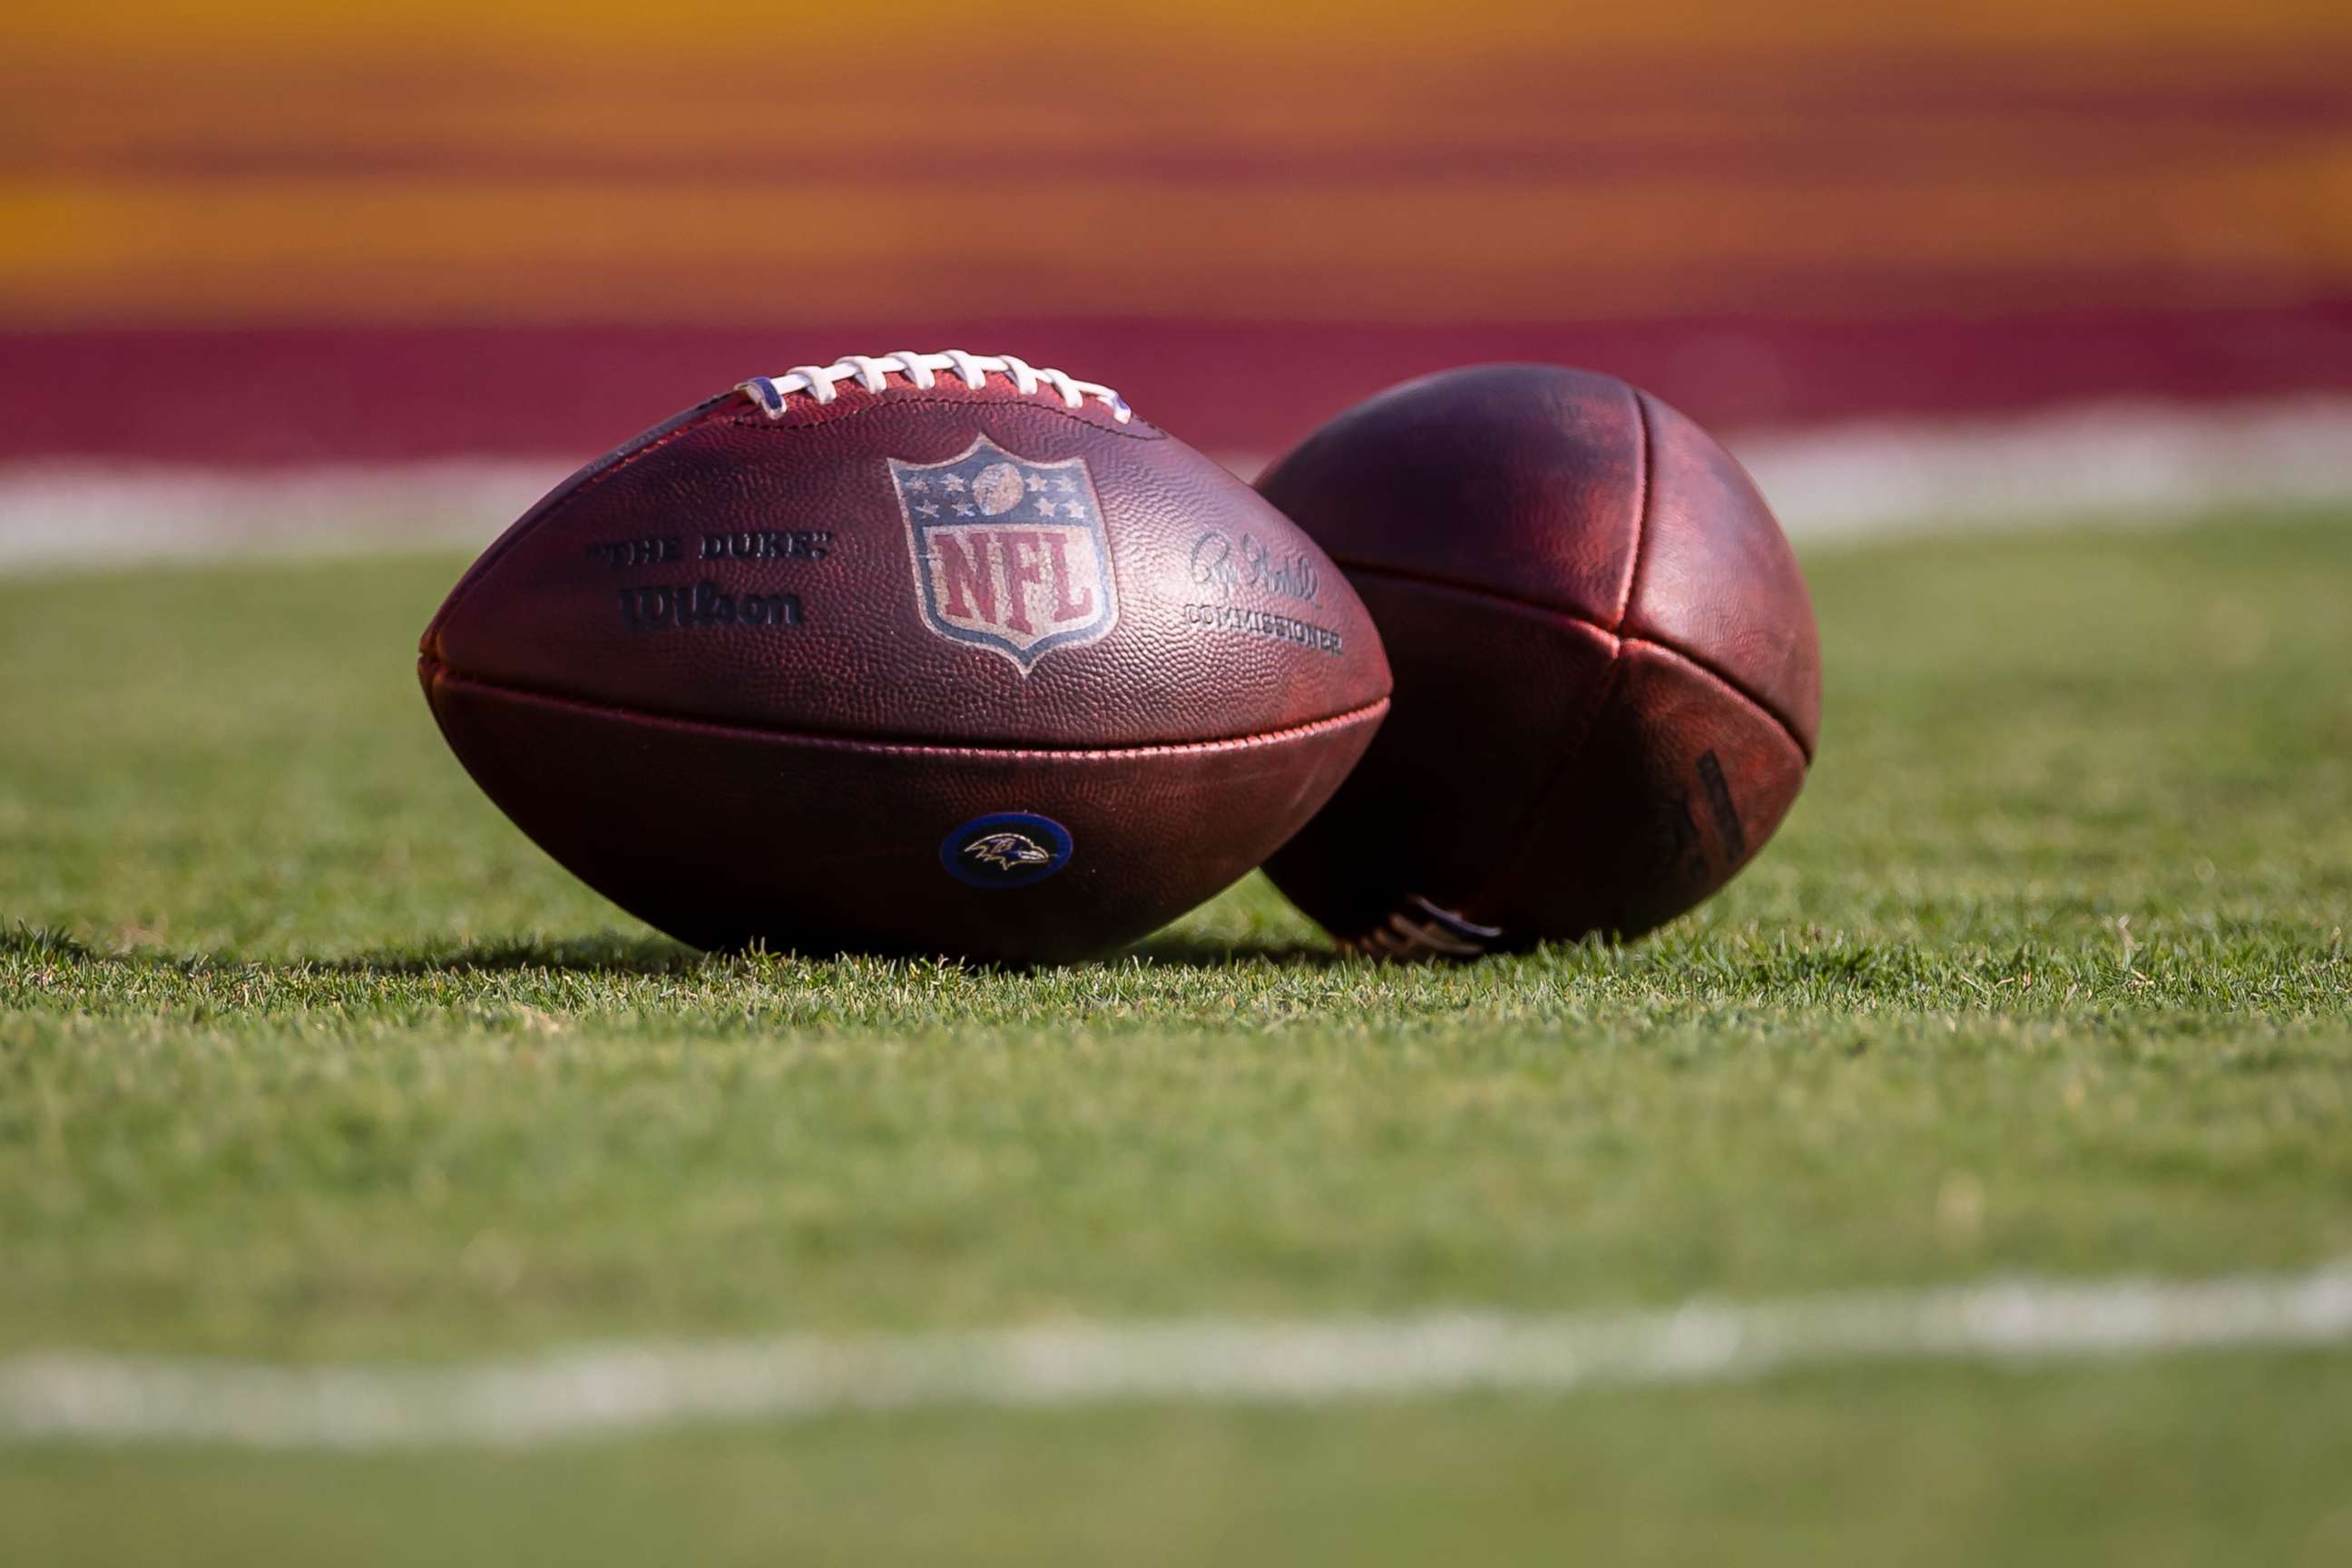 PHOTO: Two NFL footballs on the field before the preseason game between the Washington Football Team and the Baltimore Ravens, Aug. 28, 2021 in Landover, Maryland.